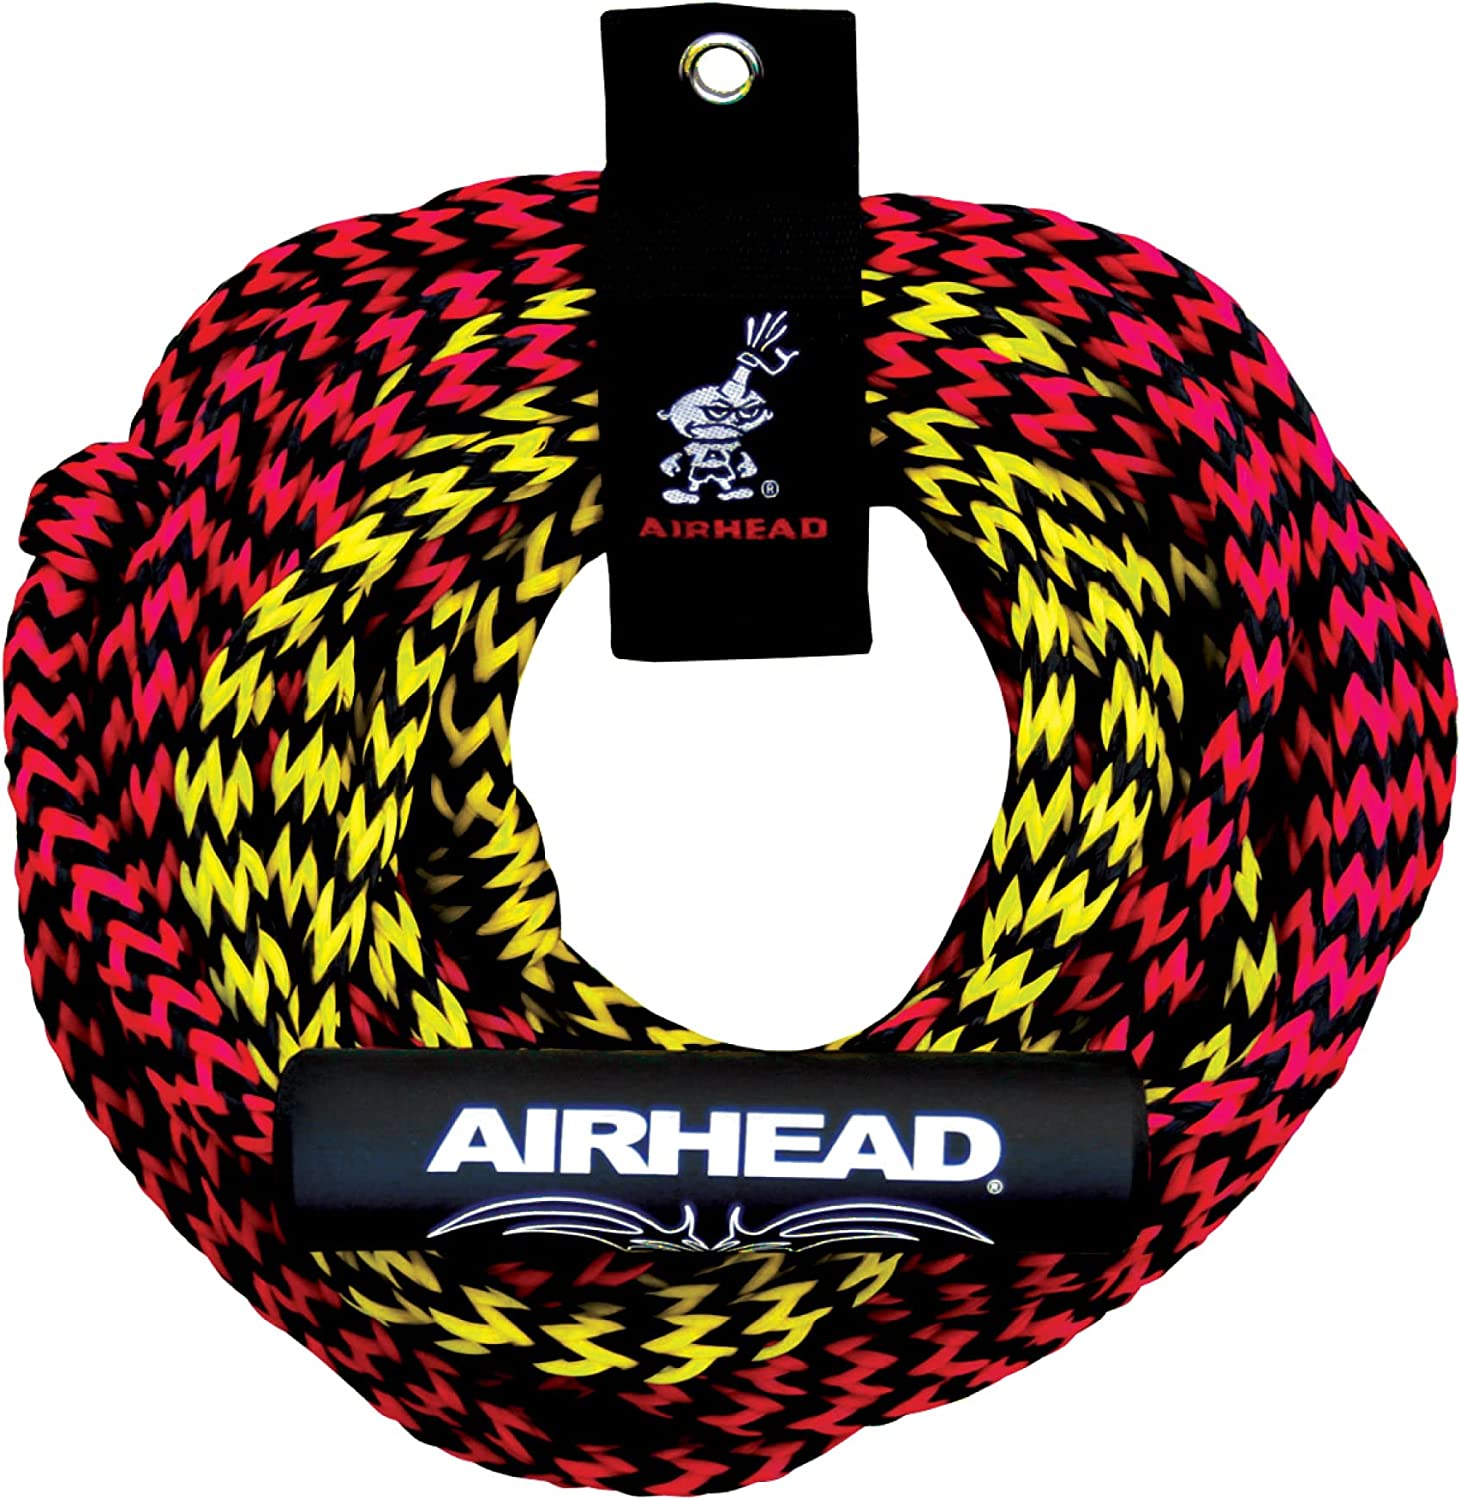 Airhead 2 Section Tow Rope for 1-4 Rider Towable Tubes, Multiple